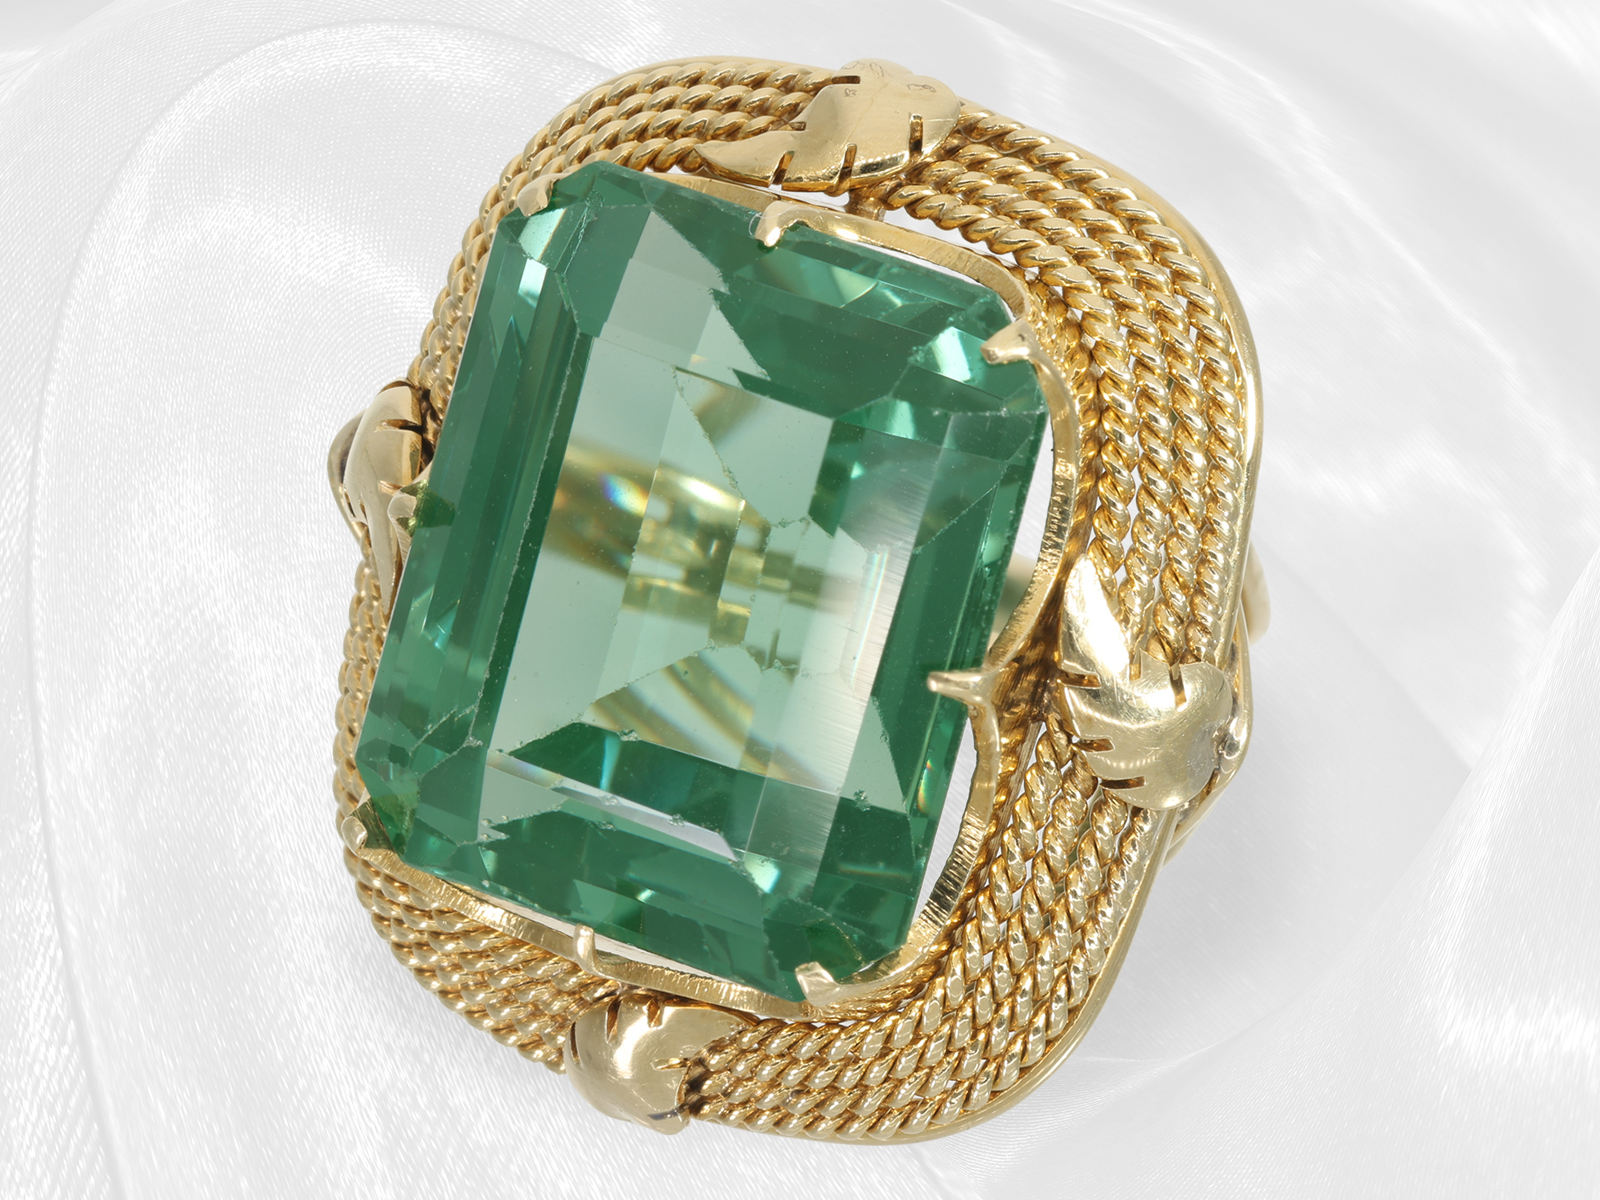 Ring: extraordinary vintage goldsmith ring with green gemstone, old 14K gold handwork